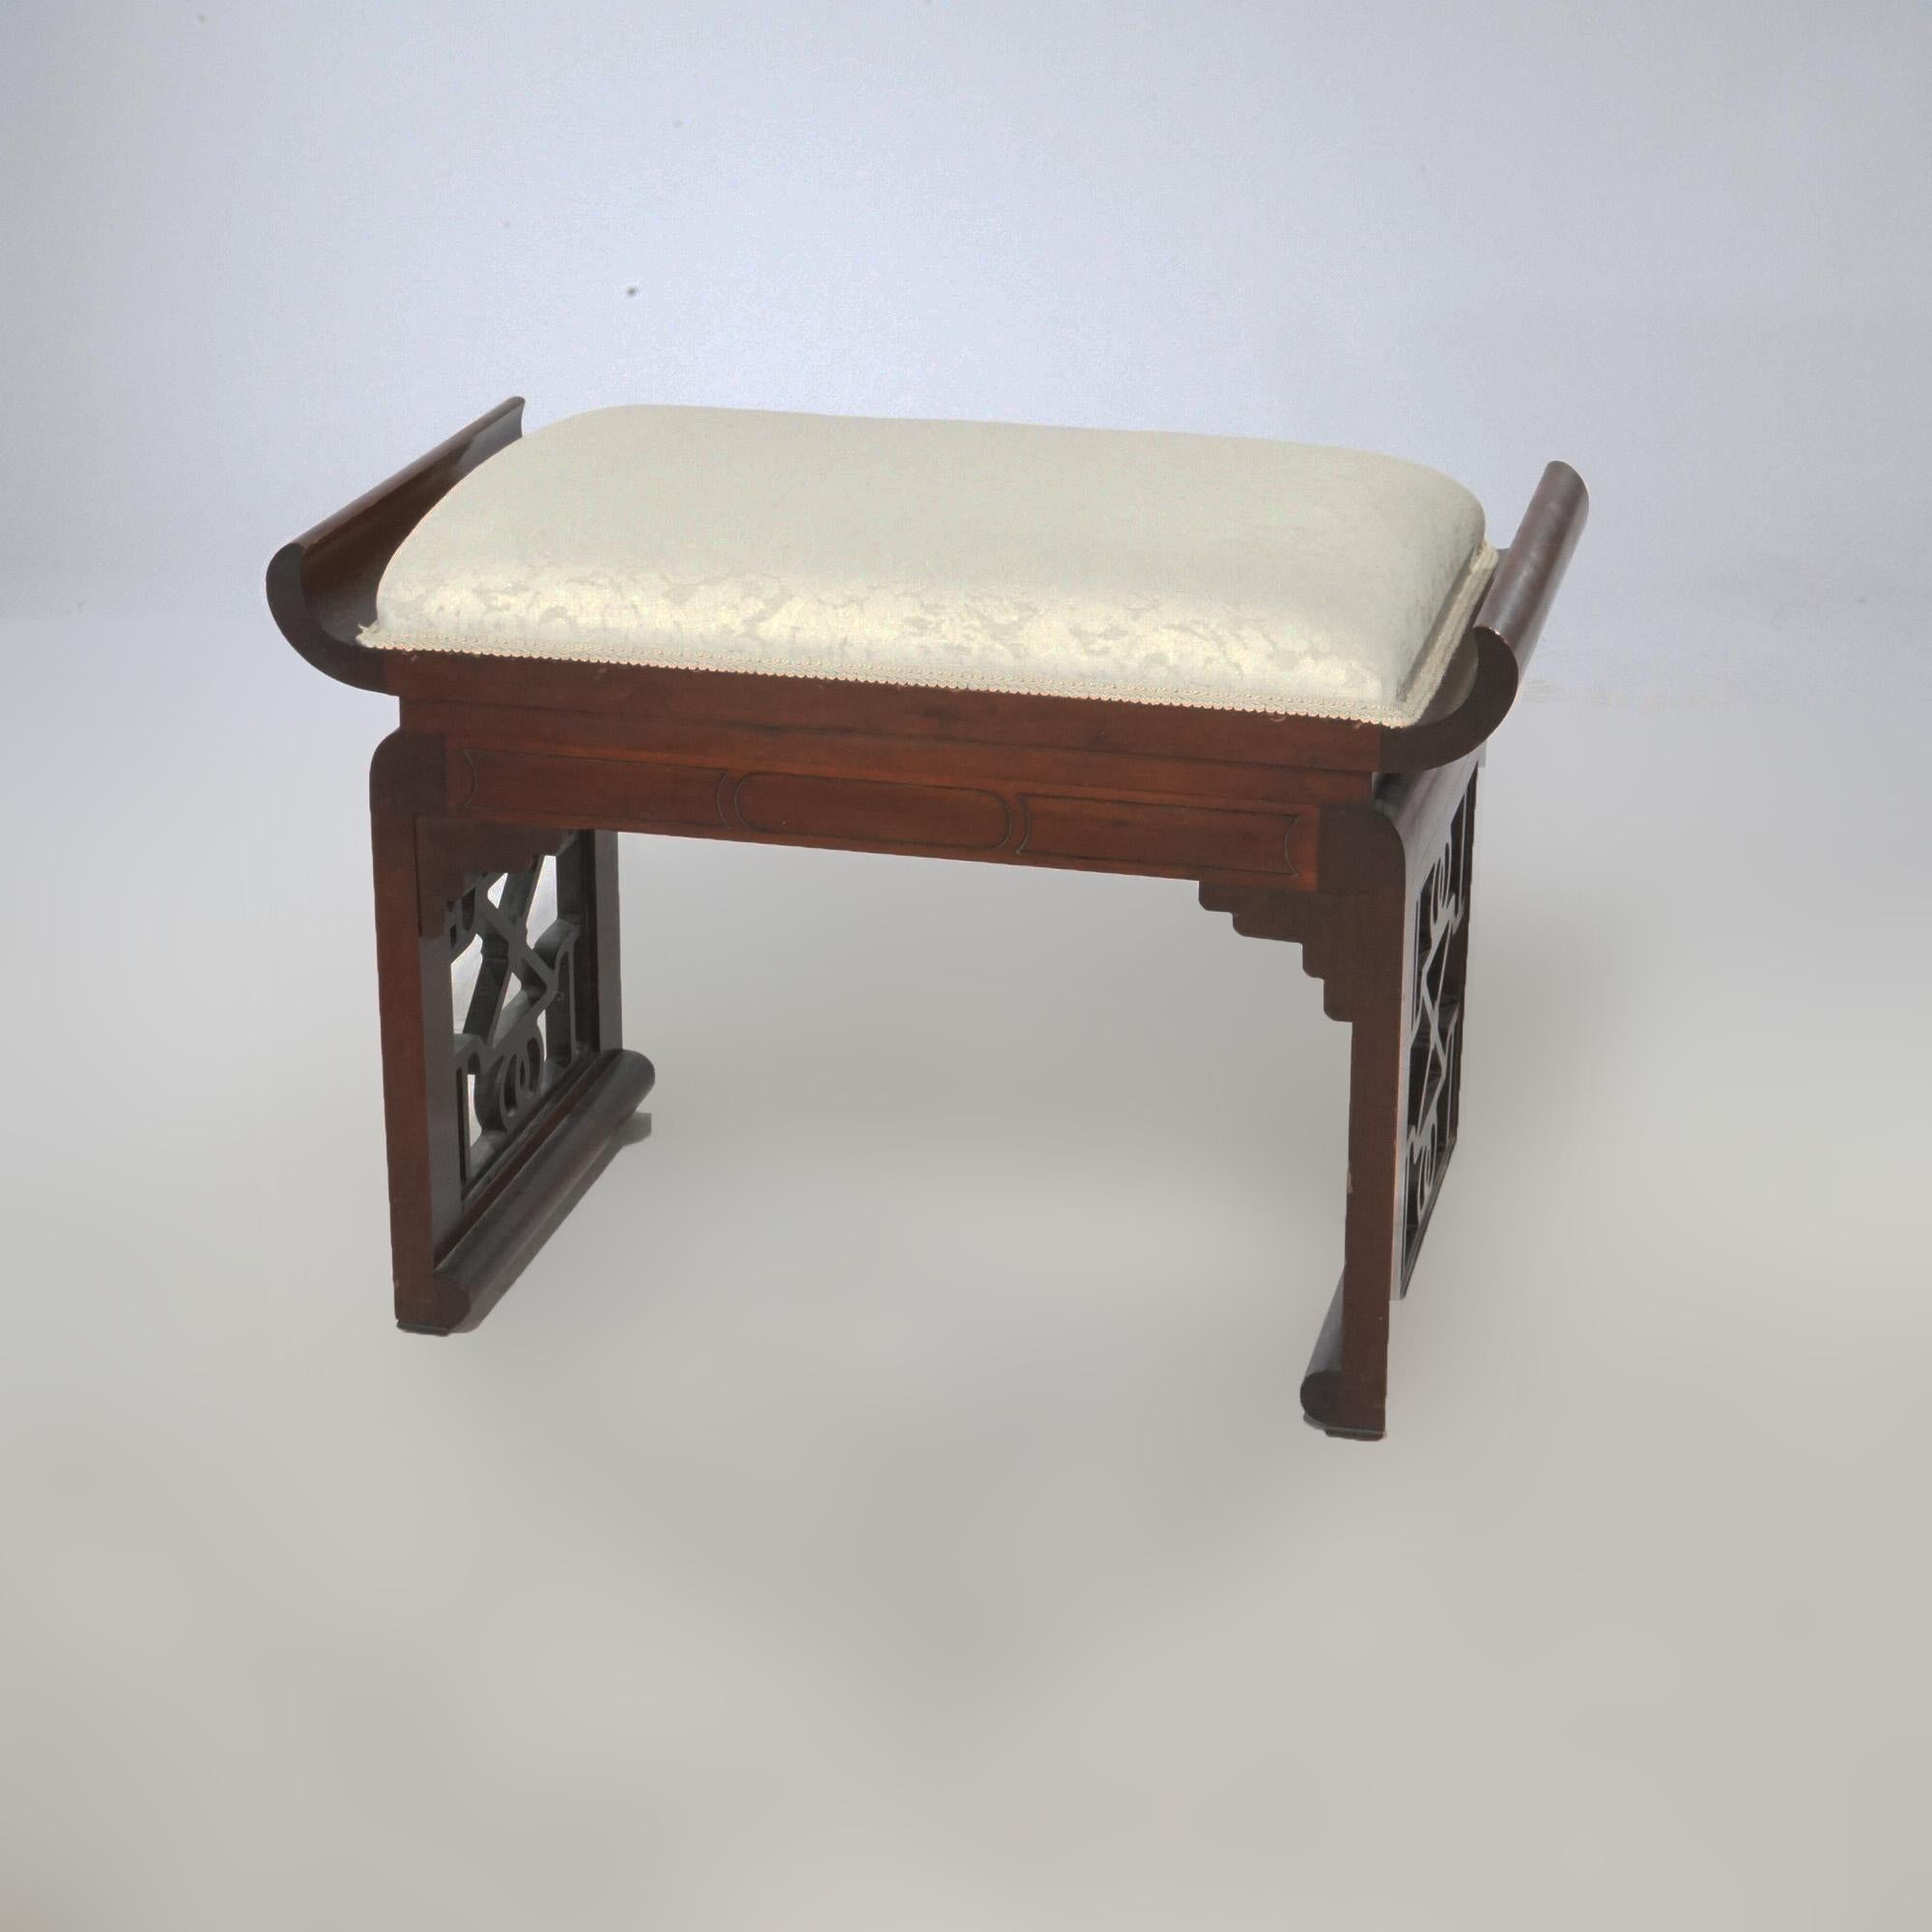 20th Century Antique Chinese Chippendale Mahogany Dressing Table With Mirror & Bench c1940 For Sale